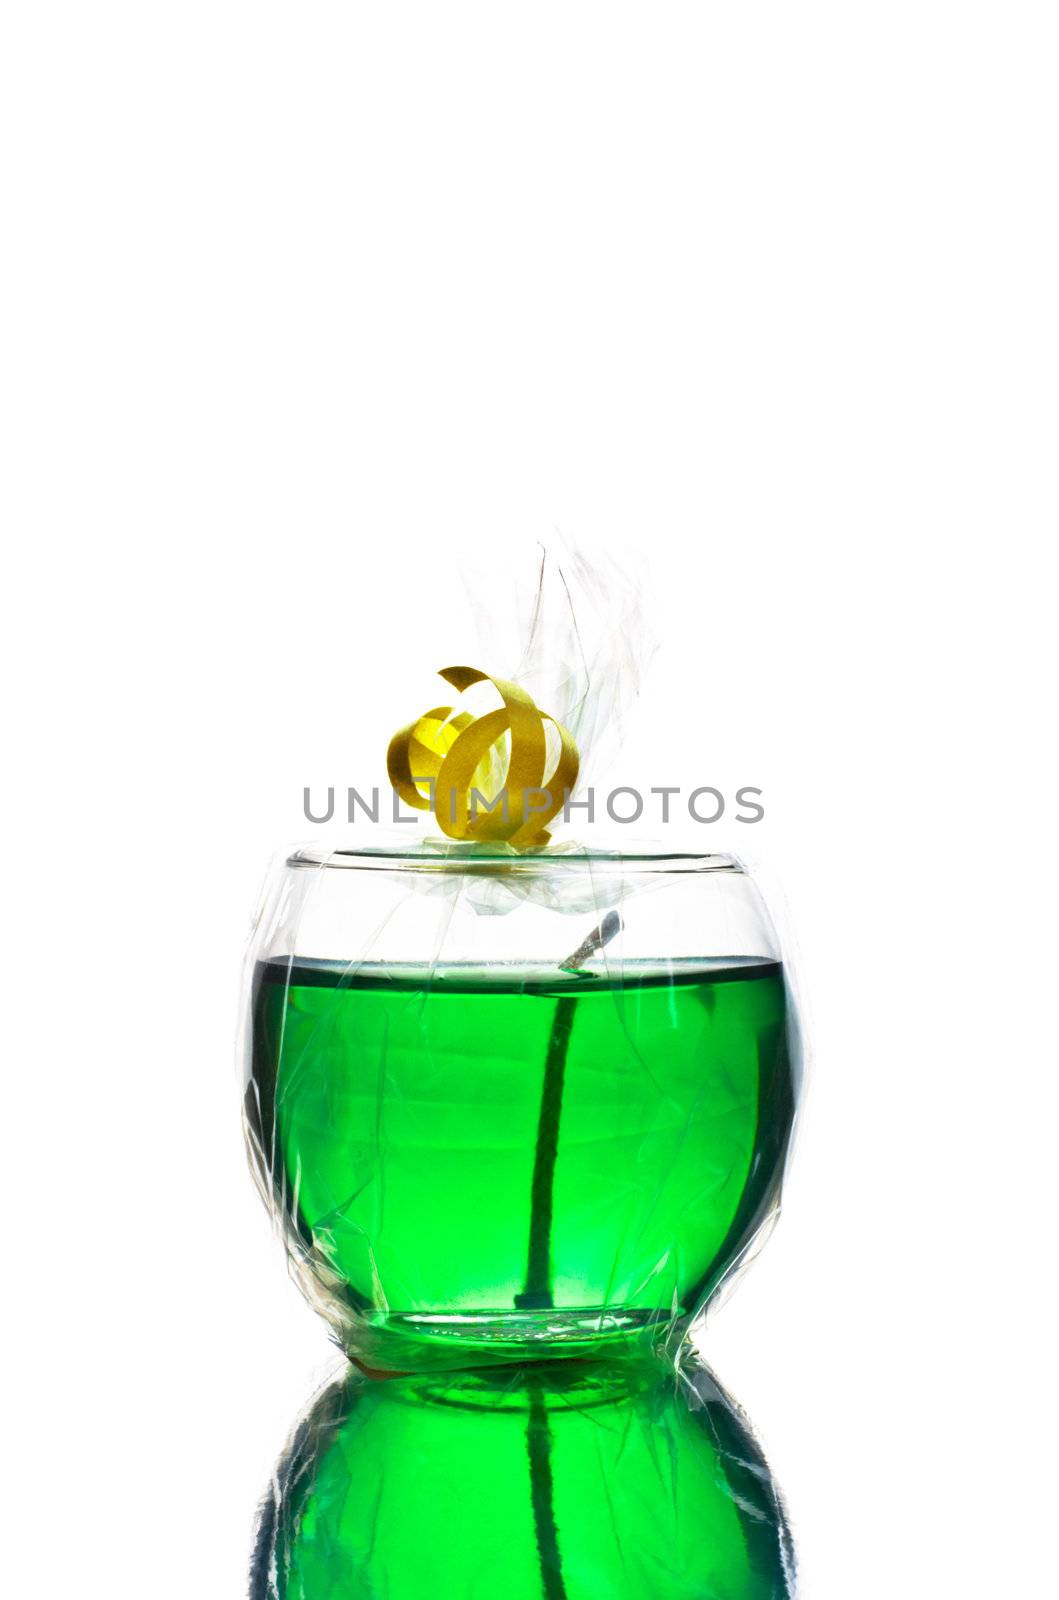 green gel candle isolated on white background